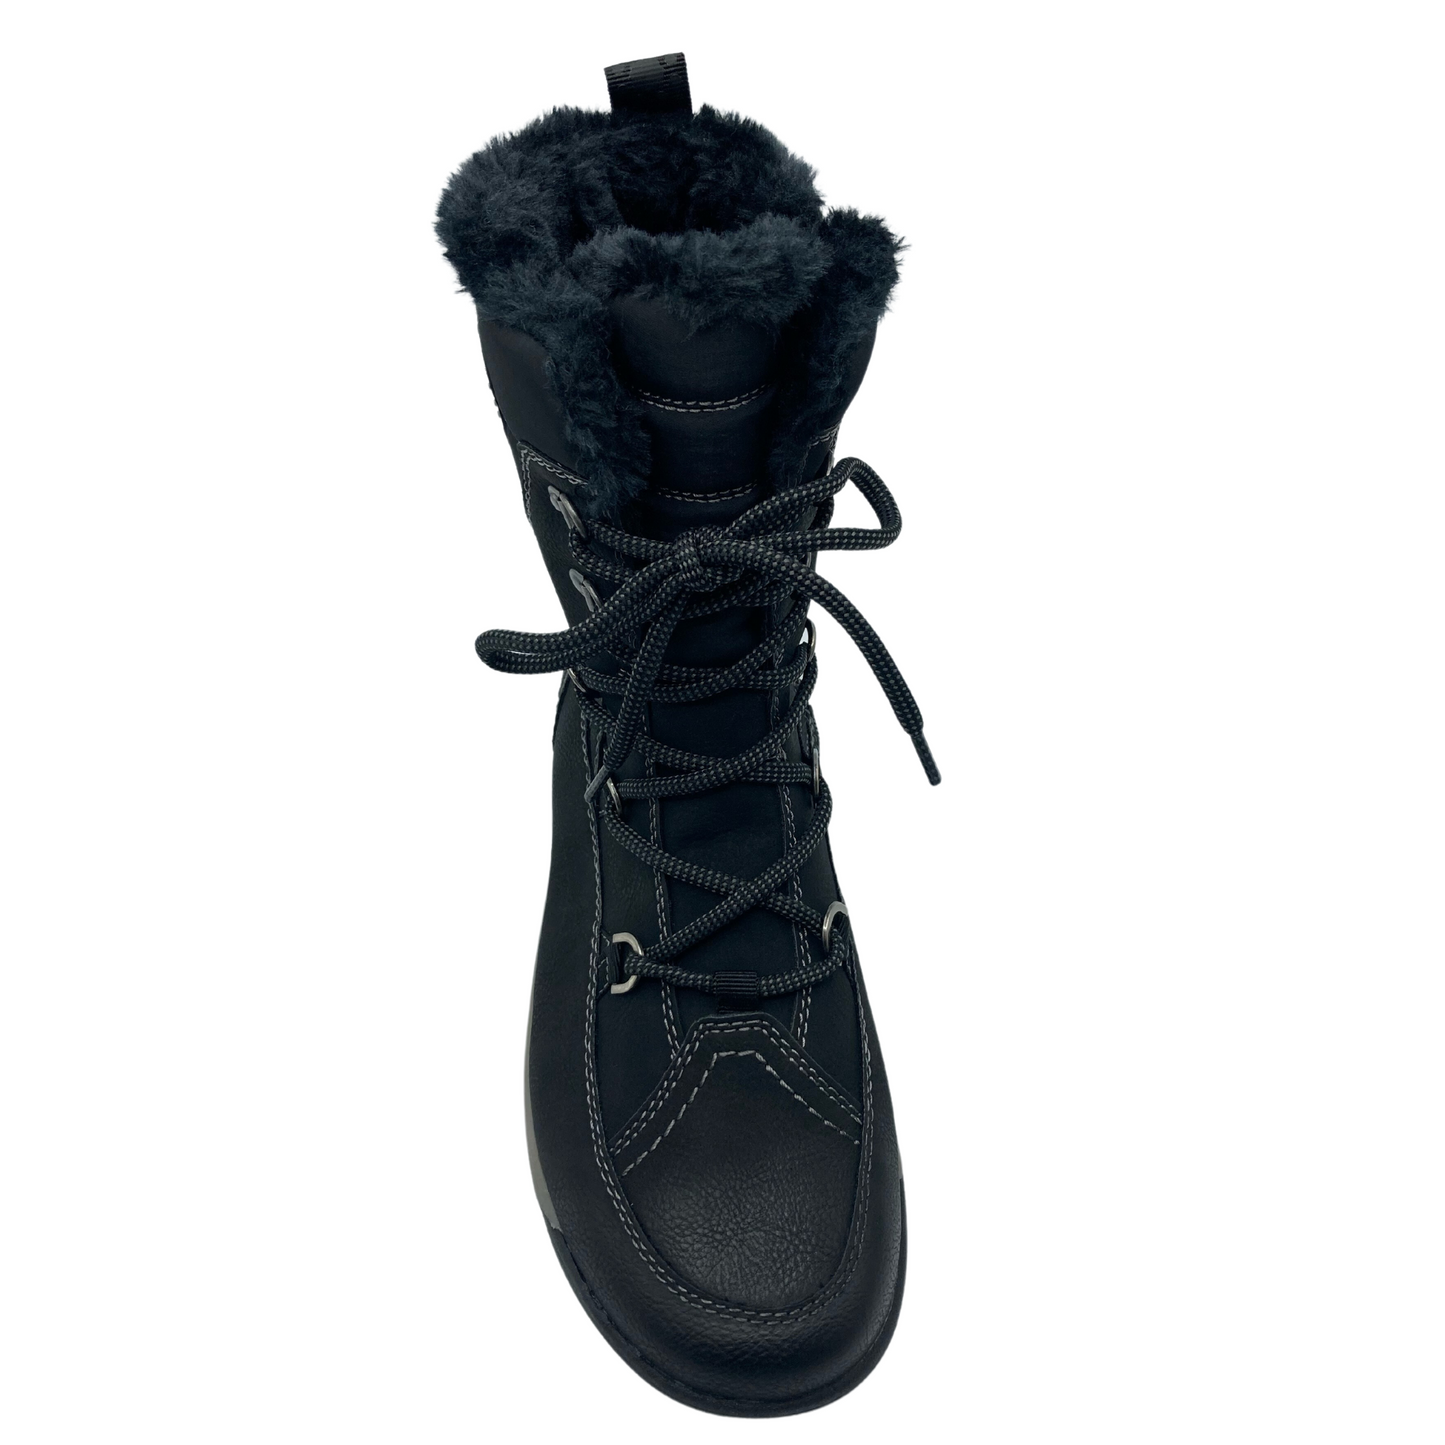 Front view of calf-height winter boot with faux shearling inner lining and front lace closure